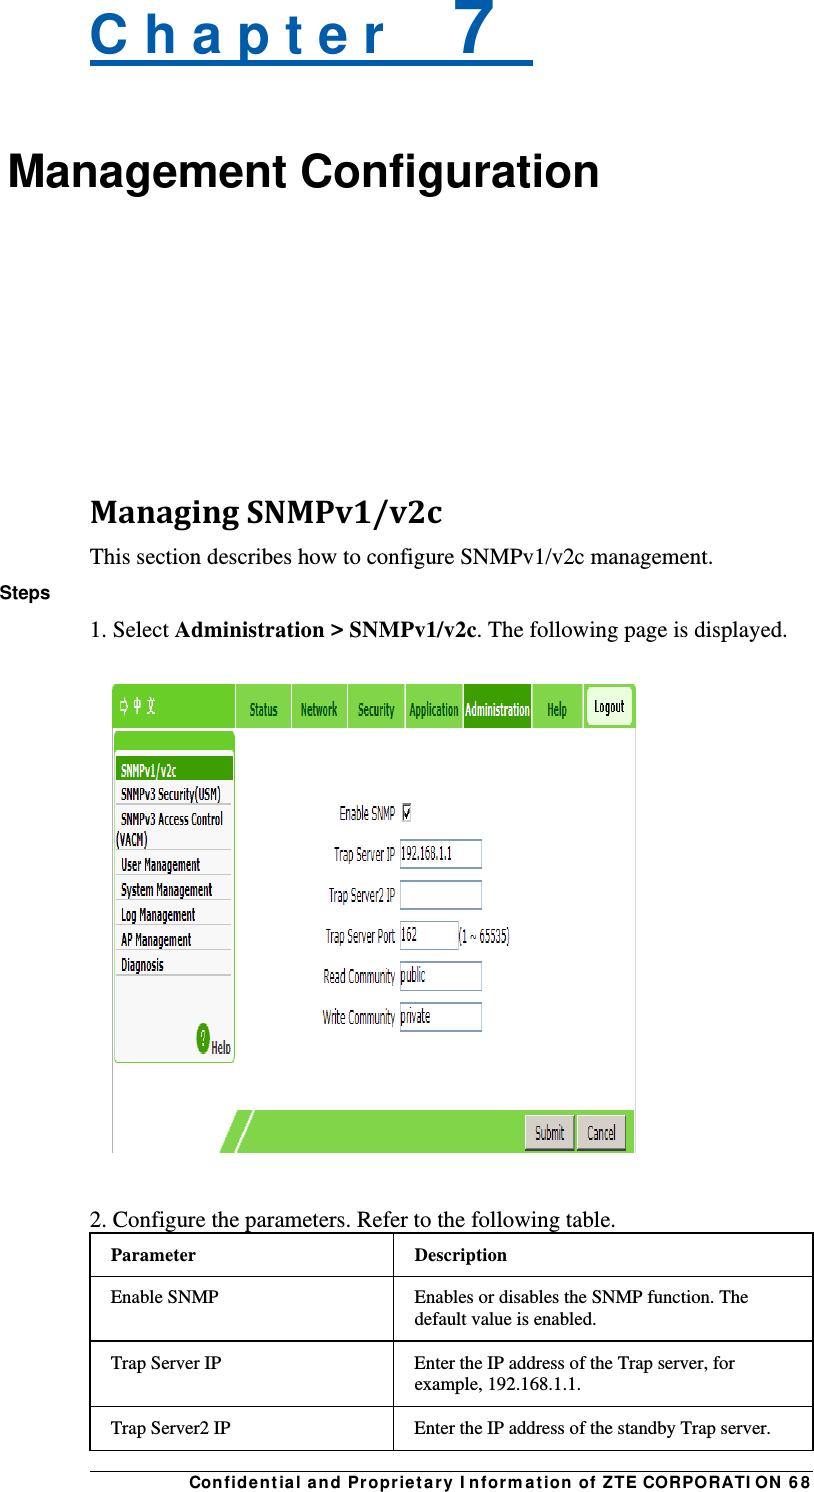 Con fidentia l and Propriet a ry I nform a t ion of ZTE CORPORATI ON  6 8 C h a p t e r    7   Management Configuration    ManagingSNMPv1/v2cThis section describes how to configure SNMPv1/v2c management. Steps 1. Select Administration &gt; SNMPv1/v2c. The following page is displayed.    2. Configure the parameters. Refer to the following table. Parameter Description Enable SNMP  Enables or disables the SNMP function. The default value is enabled. Trap Server IP    Enter the IP address of the Trap server, for example, 192.168.1.1. Trap Server2 IP    Enter the IP address of the standby Trap server. 